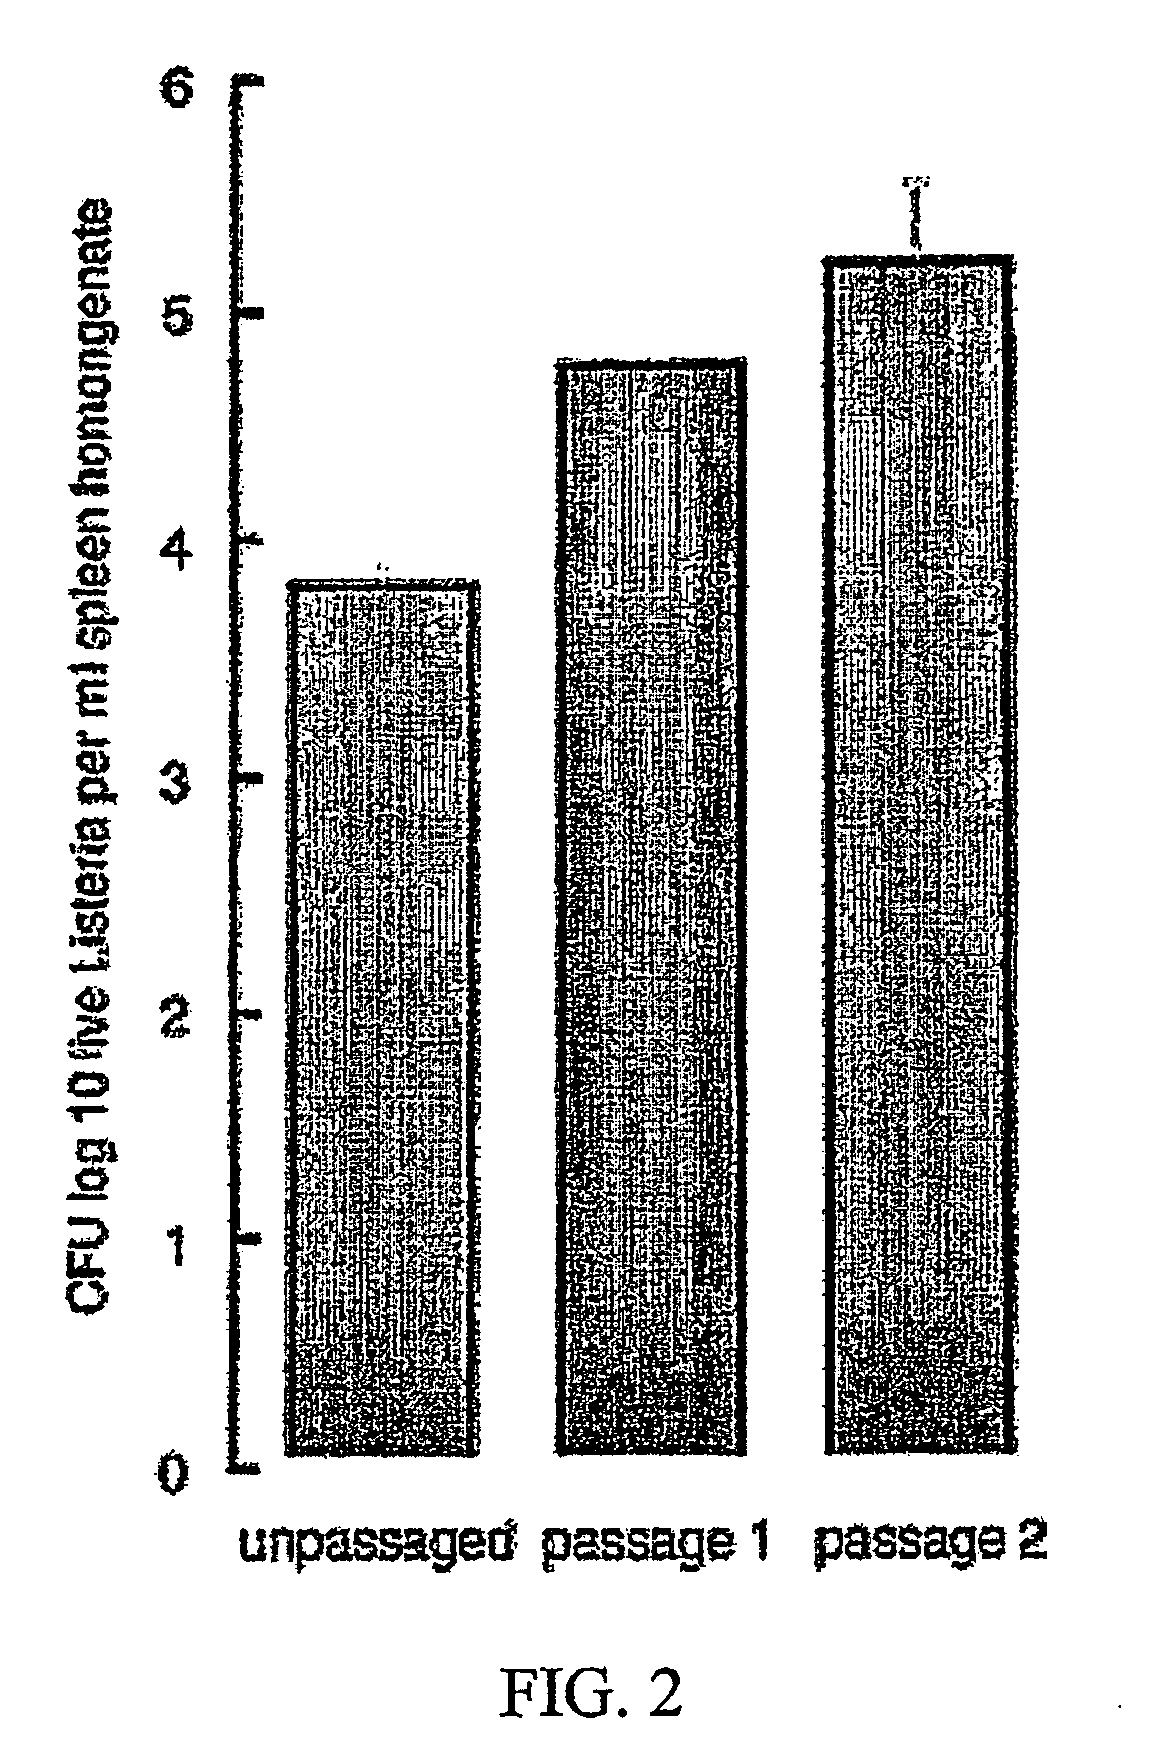 Compositions, methods and kits for enhancing the immunogenicity of a bacterial vaccine vector